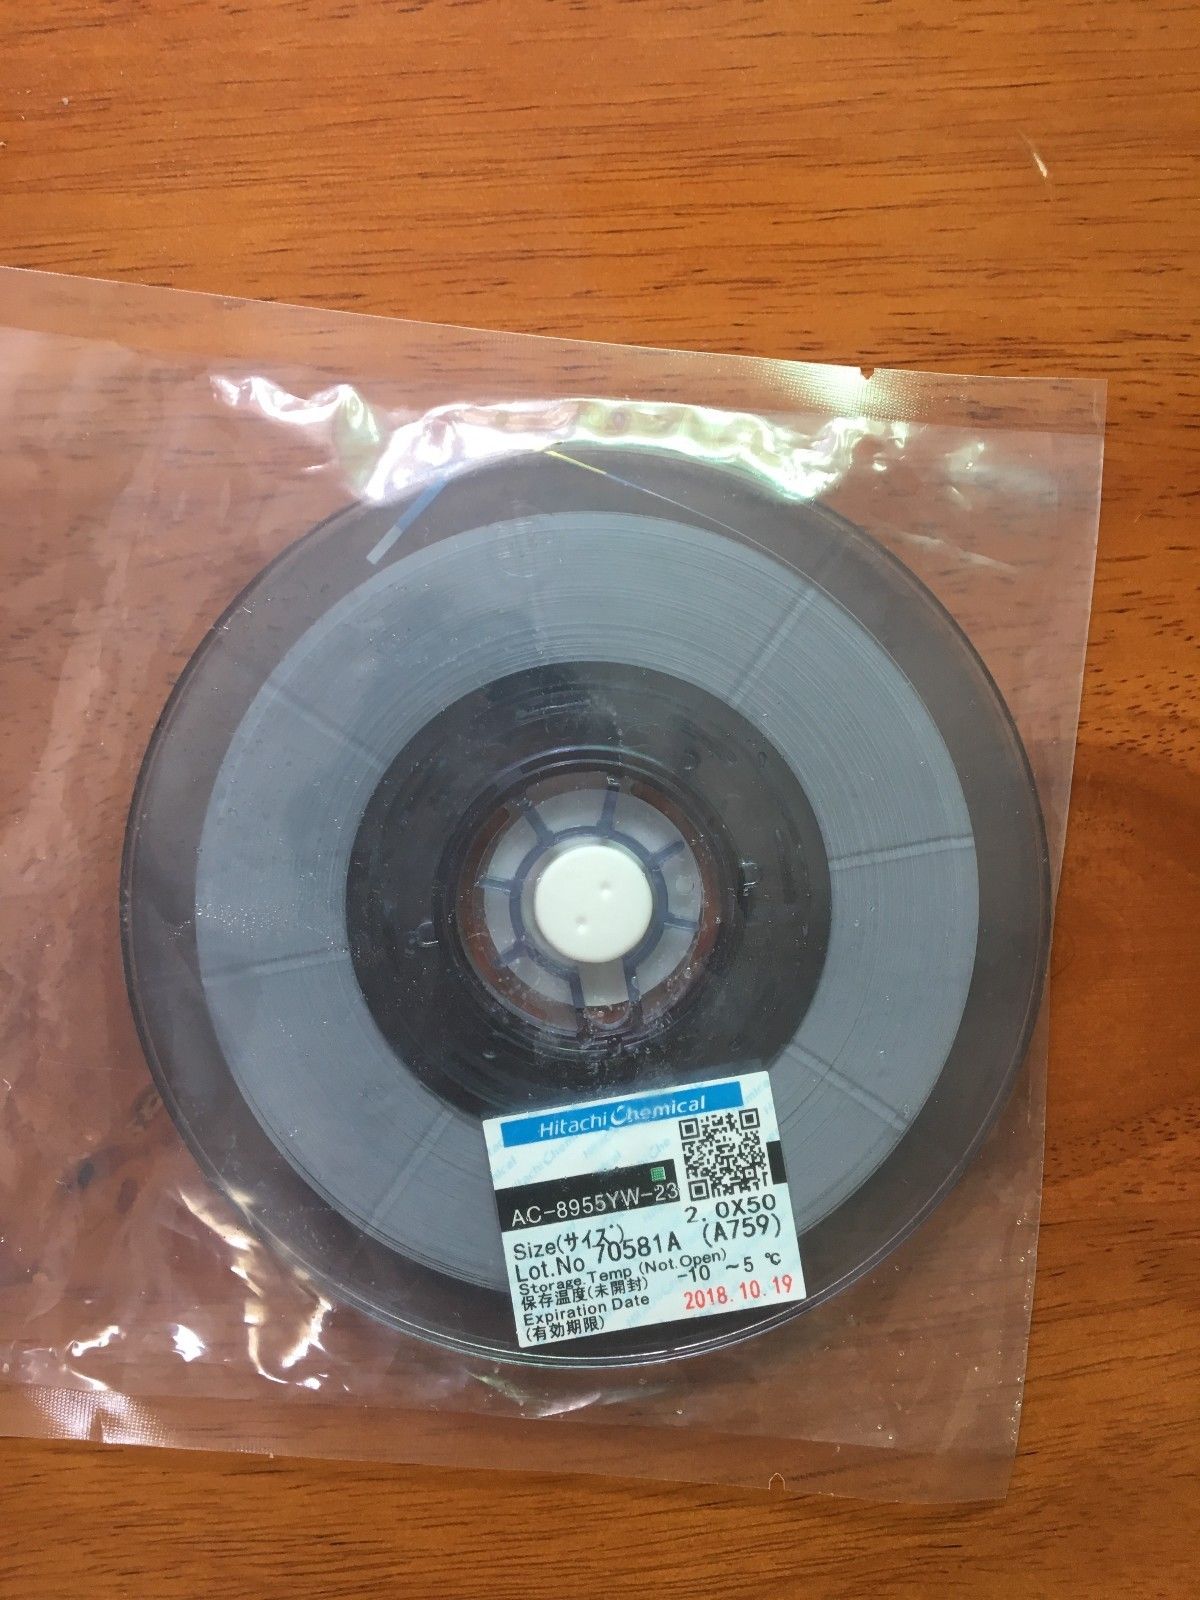 Hitachi AC-8955YW-23 1.5MM*50M TAPE Anisotropic Conductor NEWEST DATE